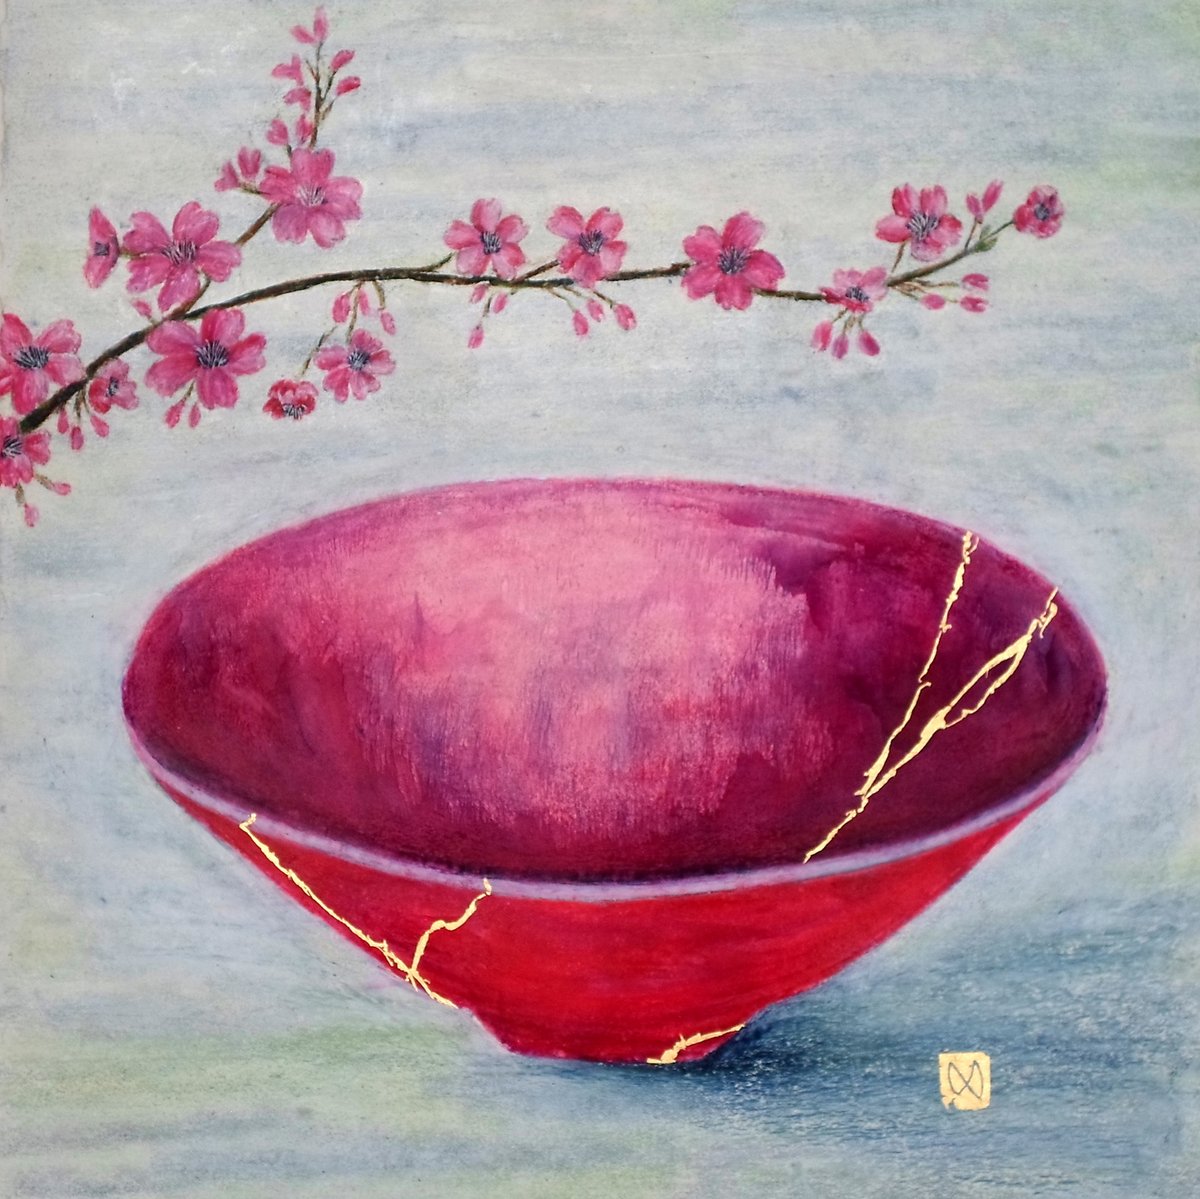 Sakura A kintsugi bowl painting by Mary Wallace with cherry blossomsJPG